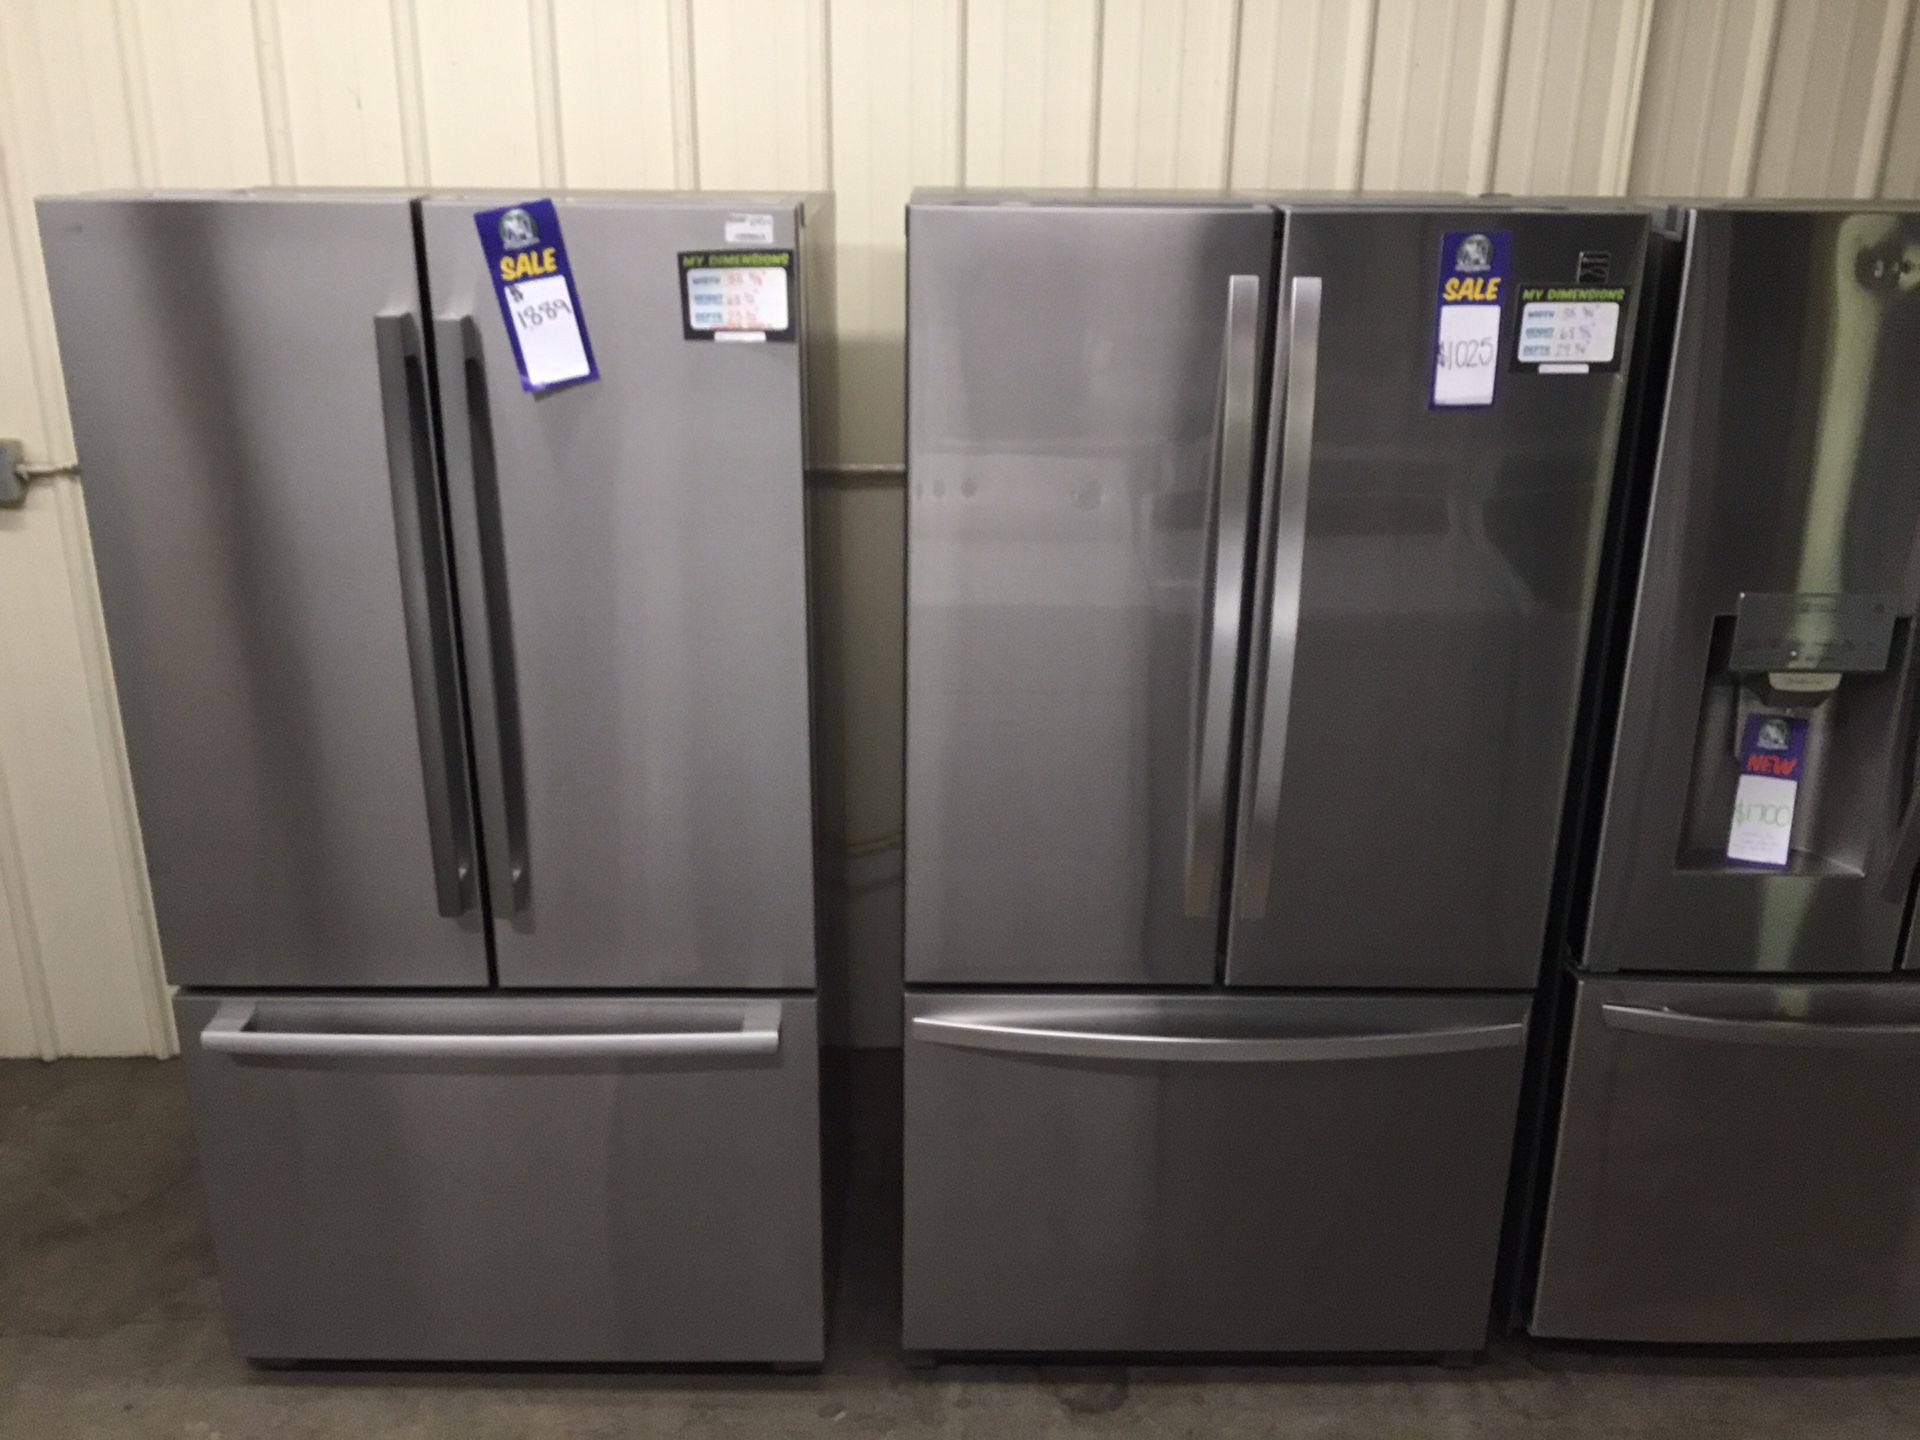 (Anoka AS) Need a Refrigerator, Stop into A-1 Appliance TODAY!